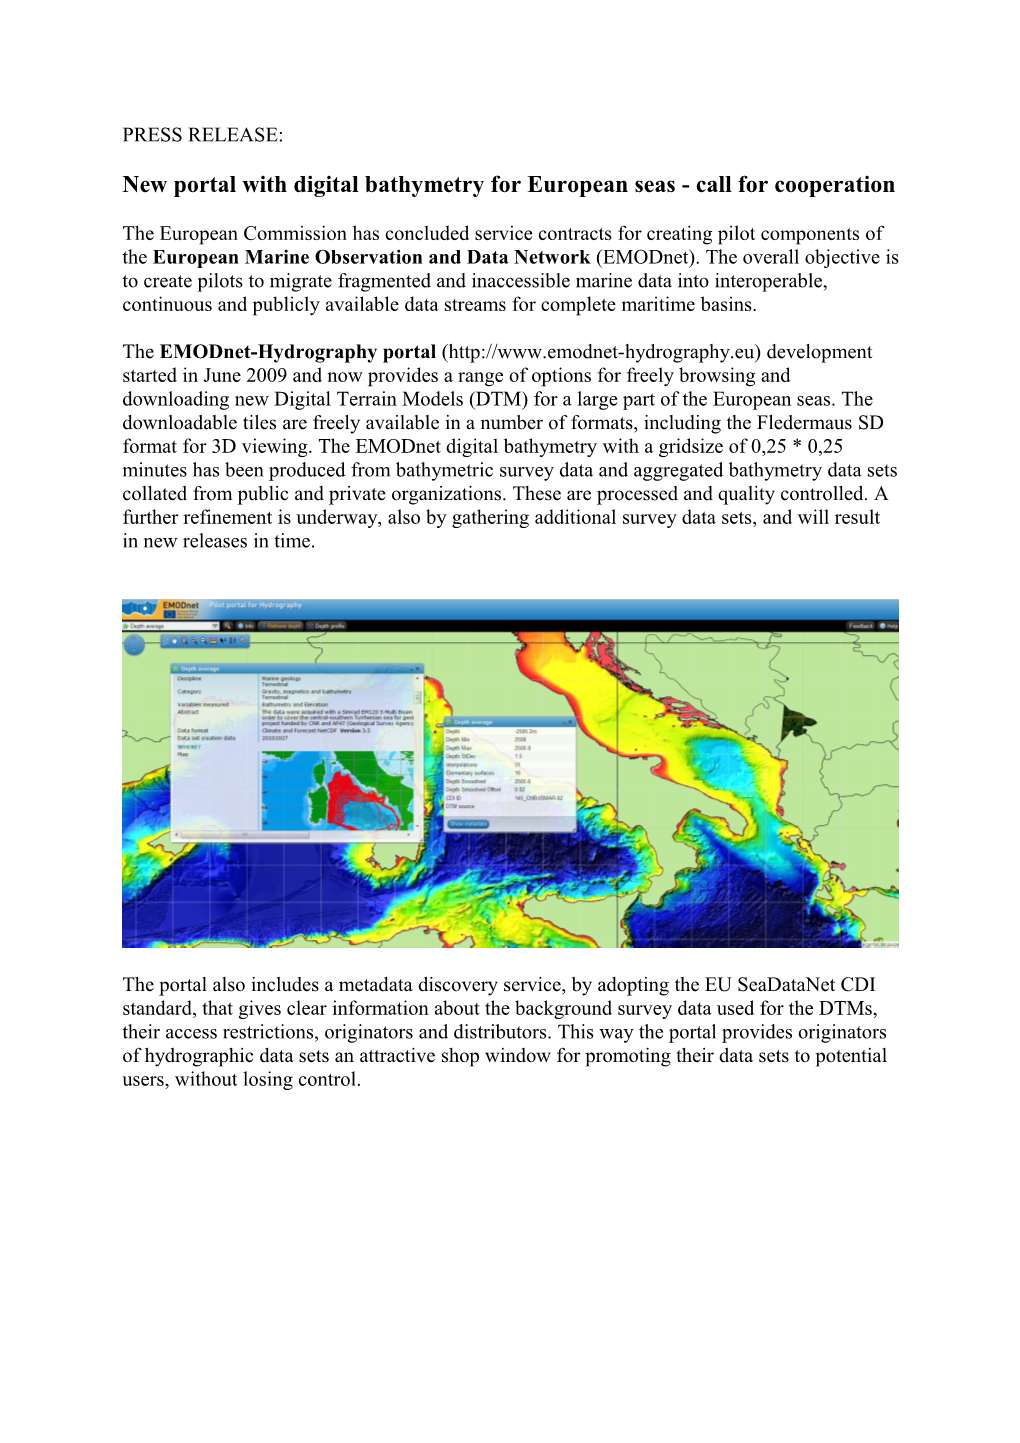 New Portal with Digital Bathymetry for European Seas - Call for Cooperation